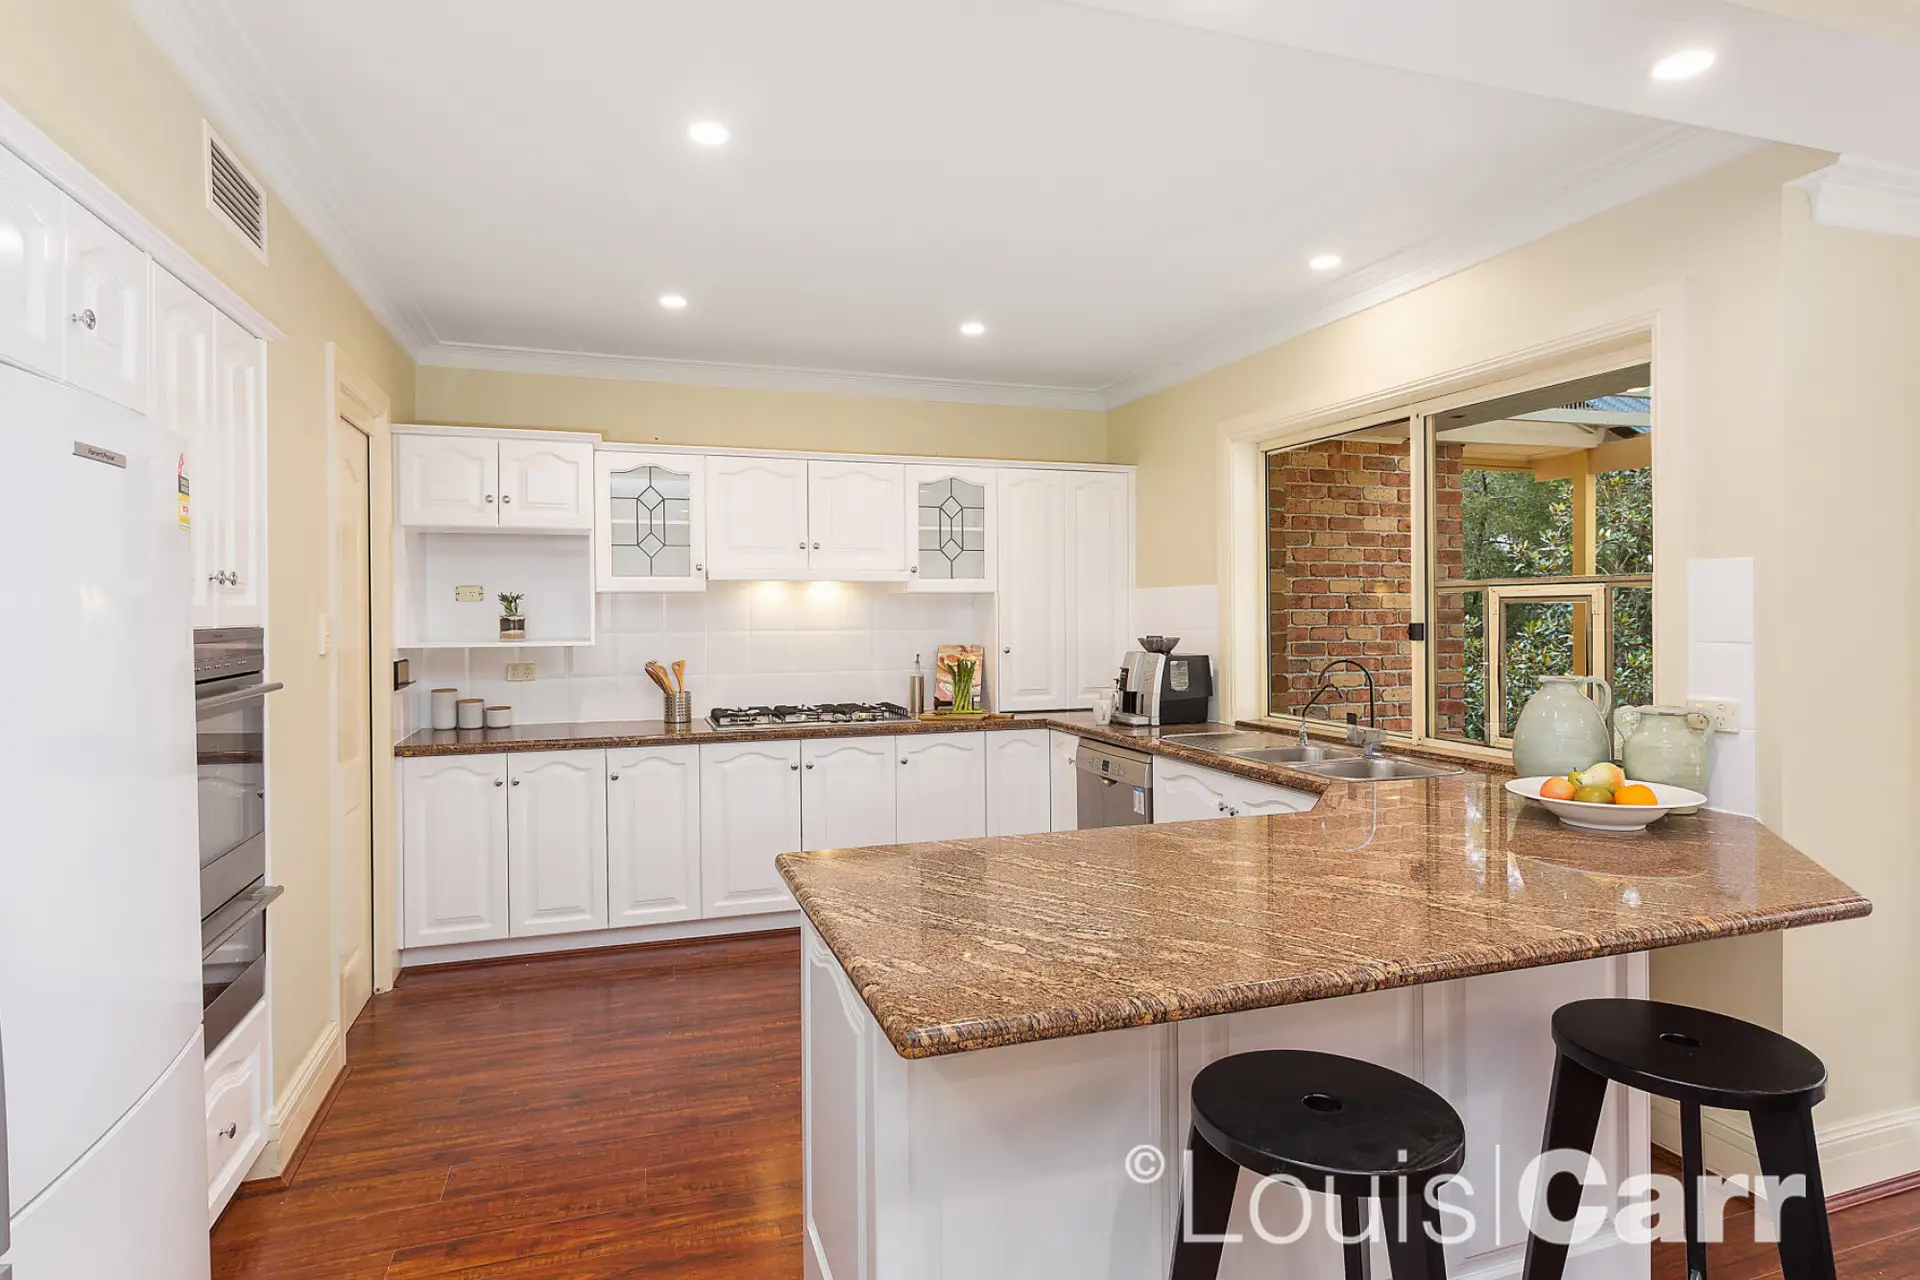 Photo #3: 3 Josephine Crescent, Cherrybrook - Sold by Louis Carr Real Estate